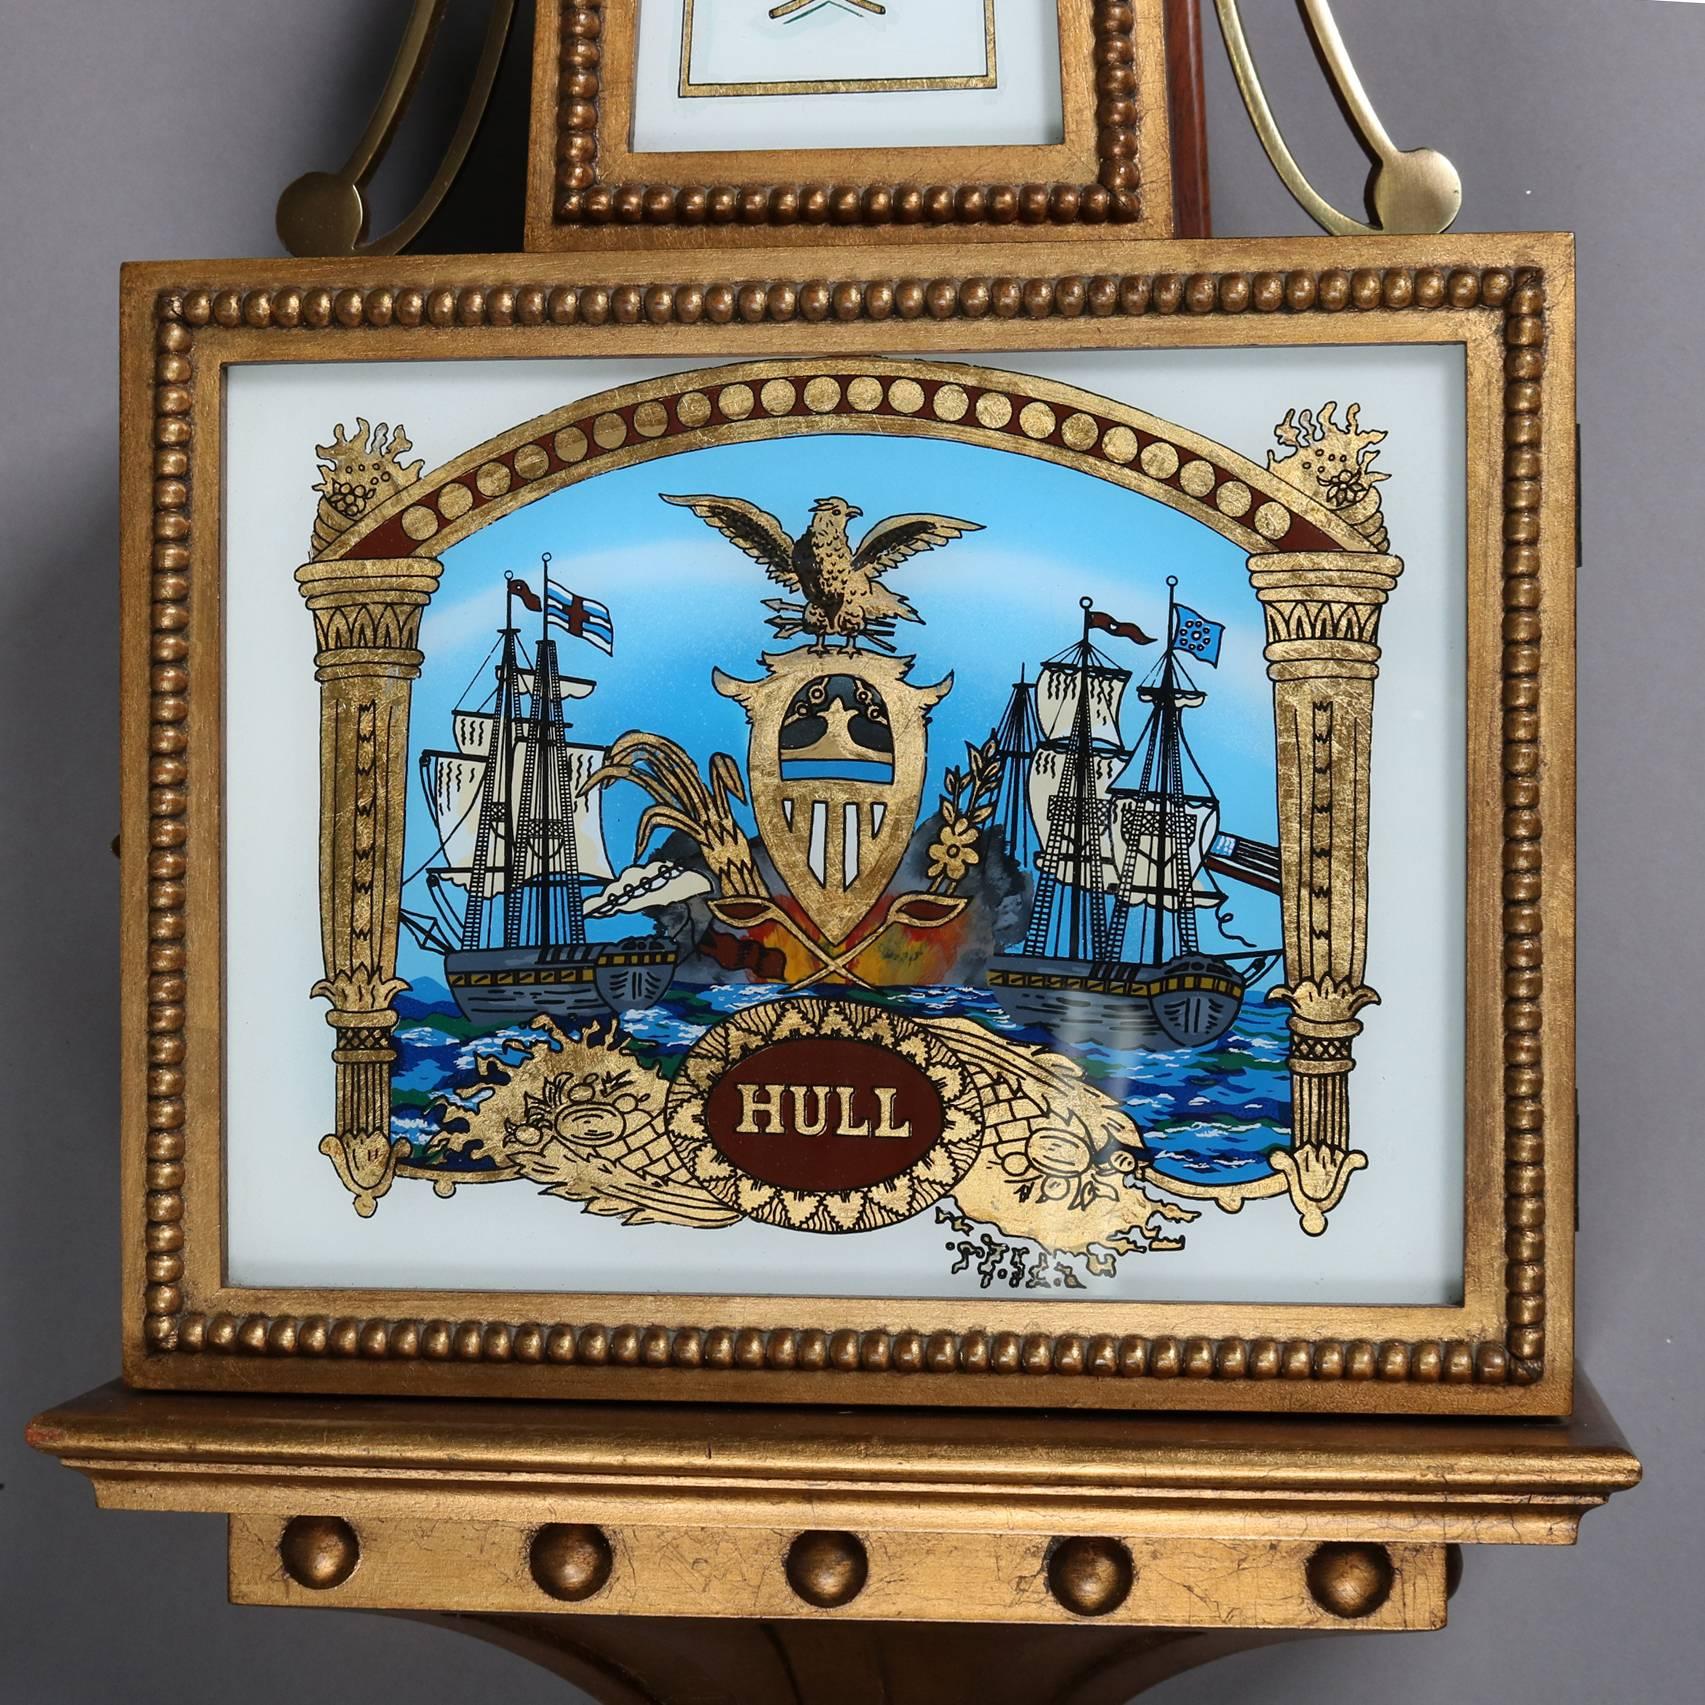 Federal style reproduction Aaron Willard nautical banjo wall clock by Colonial of Zeeland, MI for The Henry Ford Museum features gilt case with painted glass panels of maritime scene of tall mast ships and central shield and 